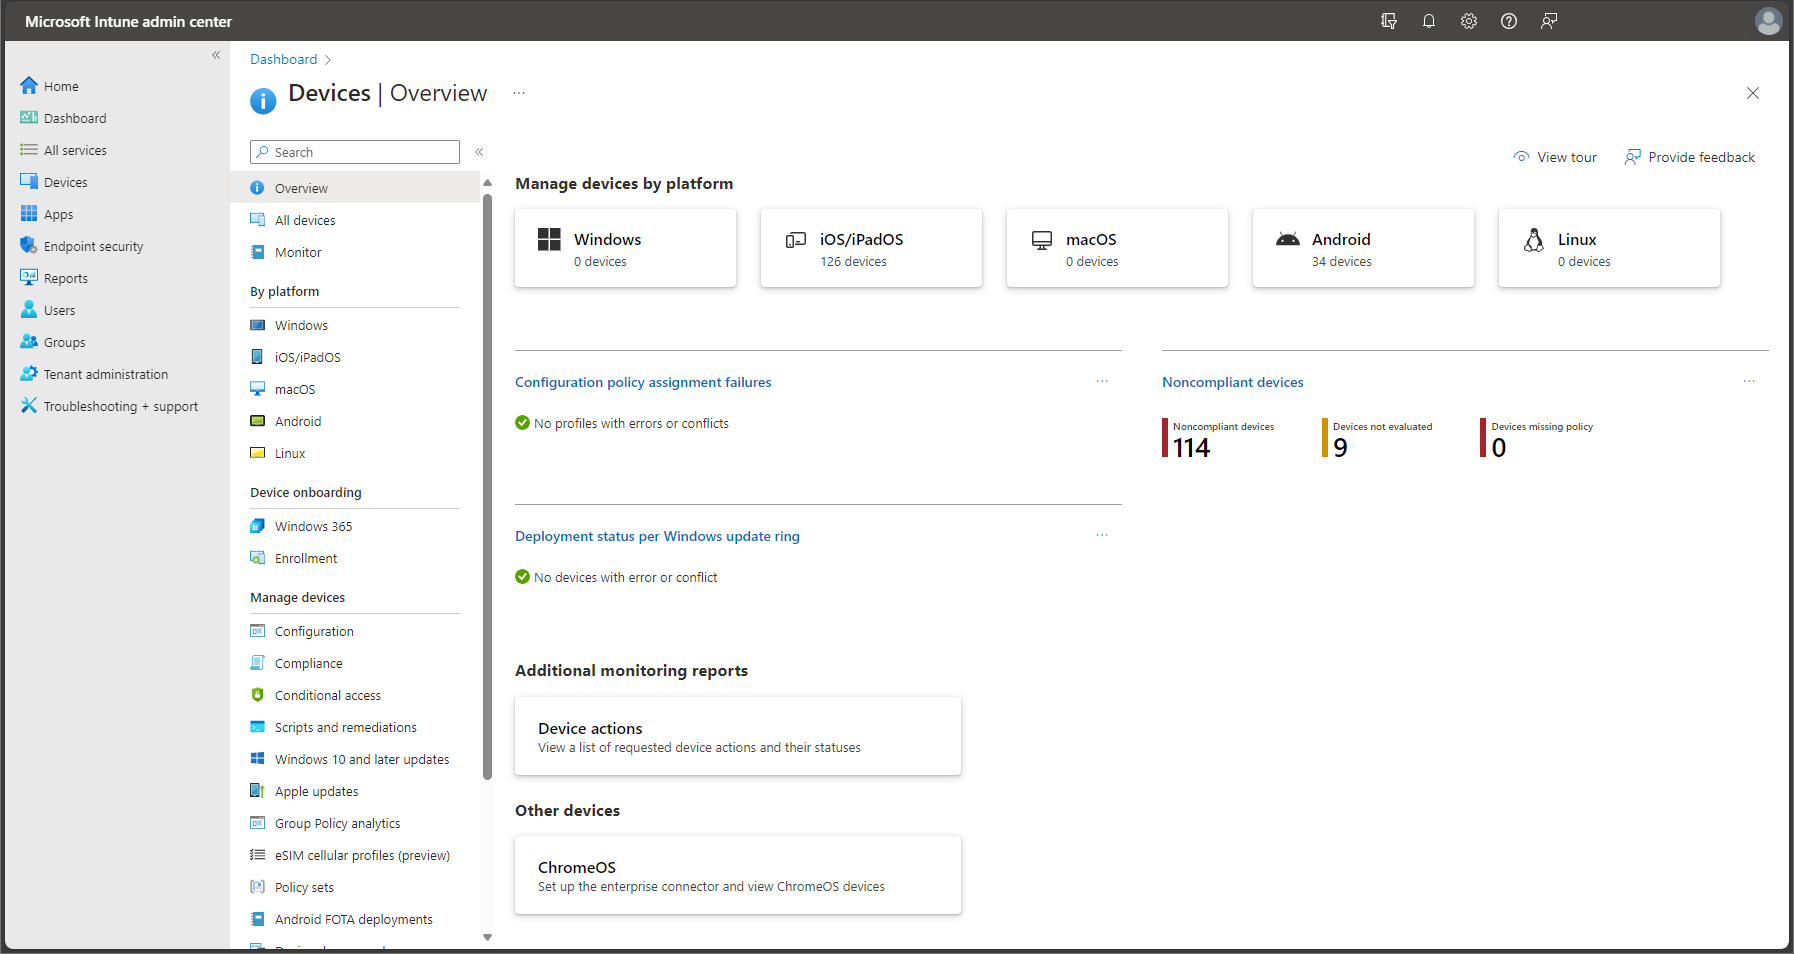 Screenshot of the Microsoft Intune admin center - Devices